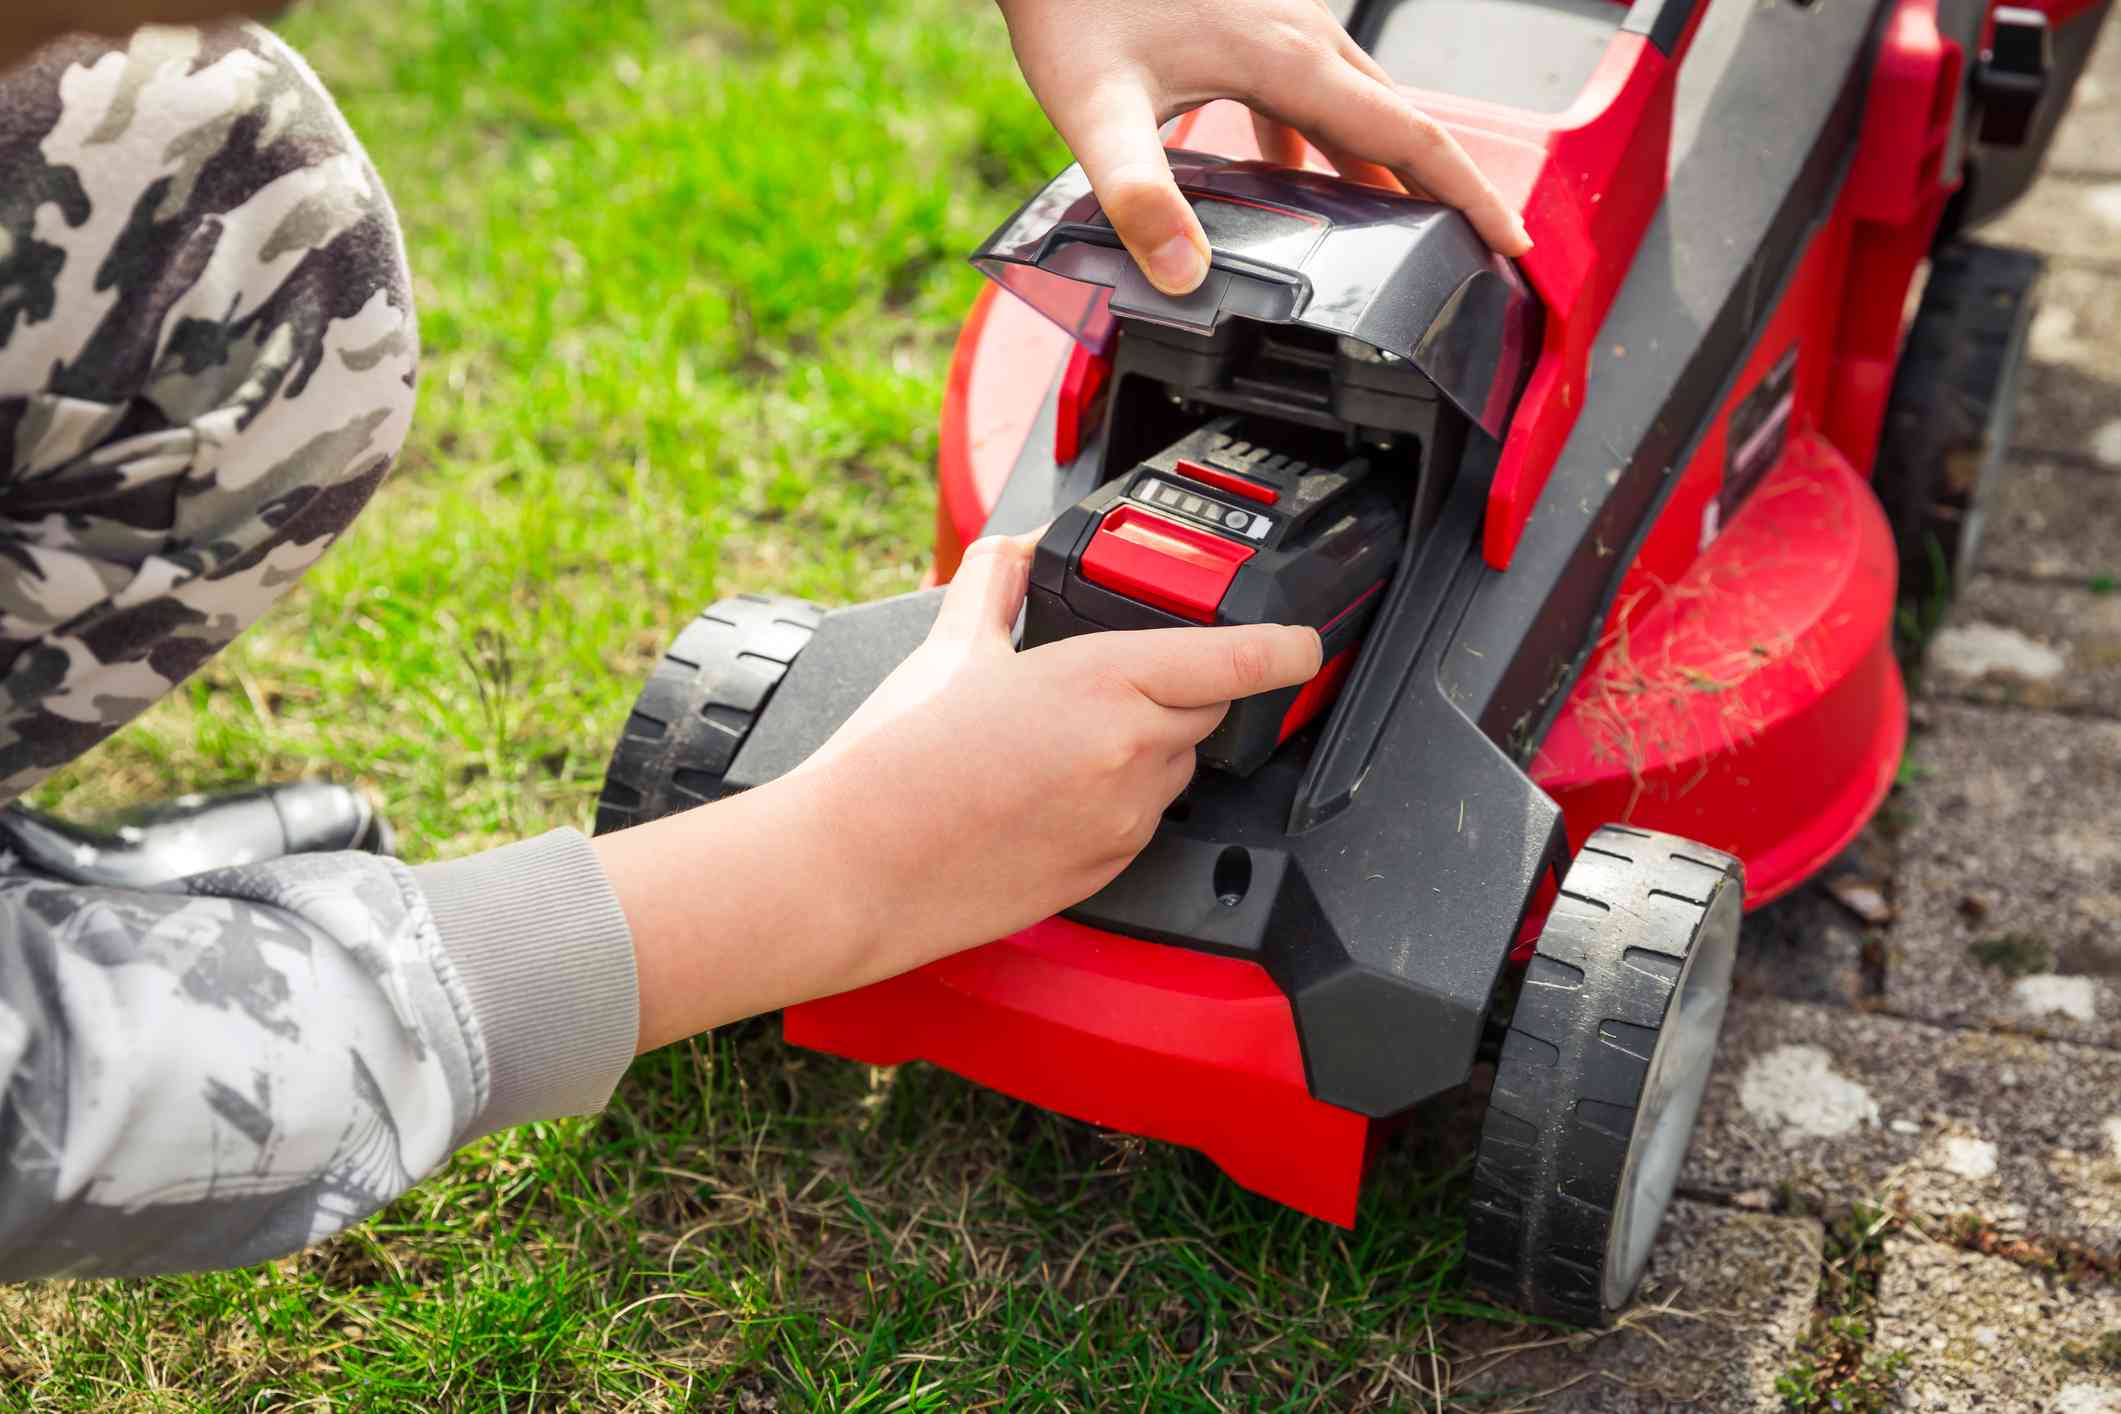 How Long Does it Take to Charge a Lawn Mower Battery?